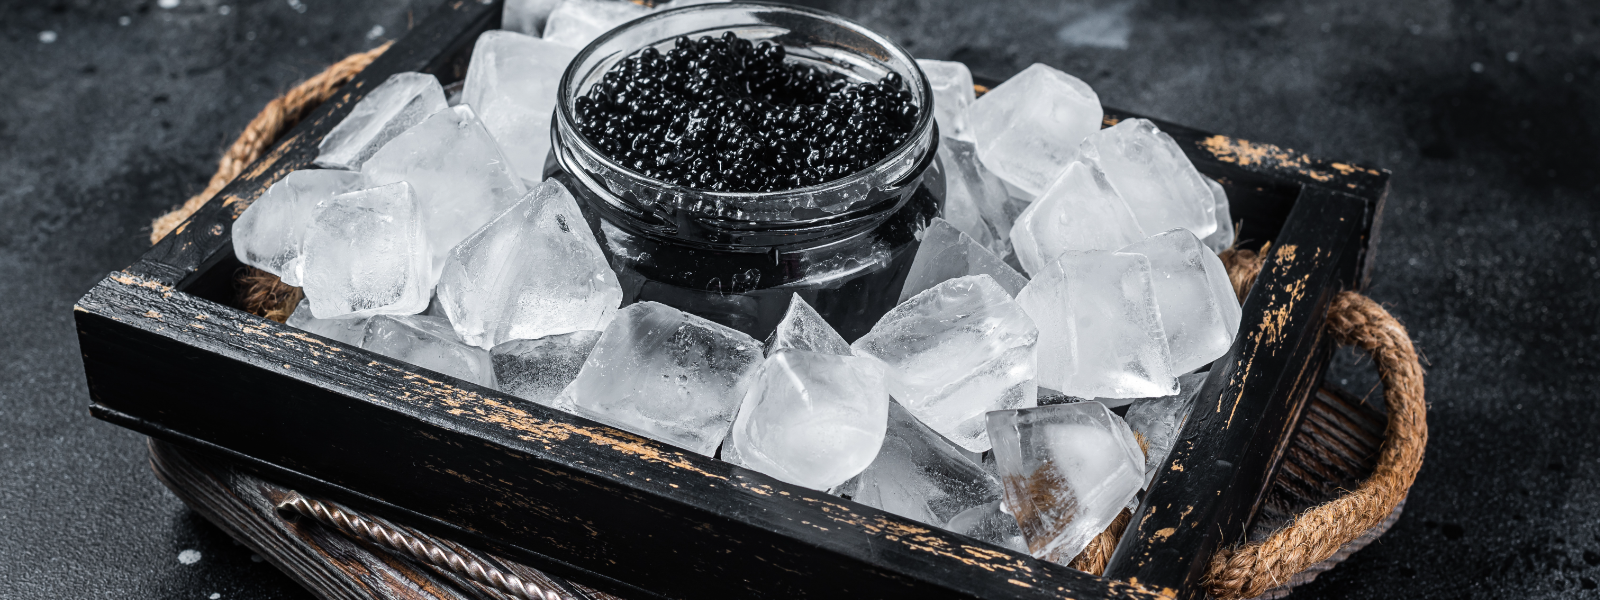 KAAVIAR OÜ - We offer an exquisite range of fresh caviar and fish products, complemented by exclusive tasting events.